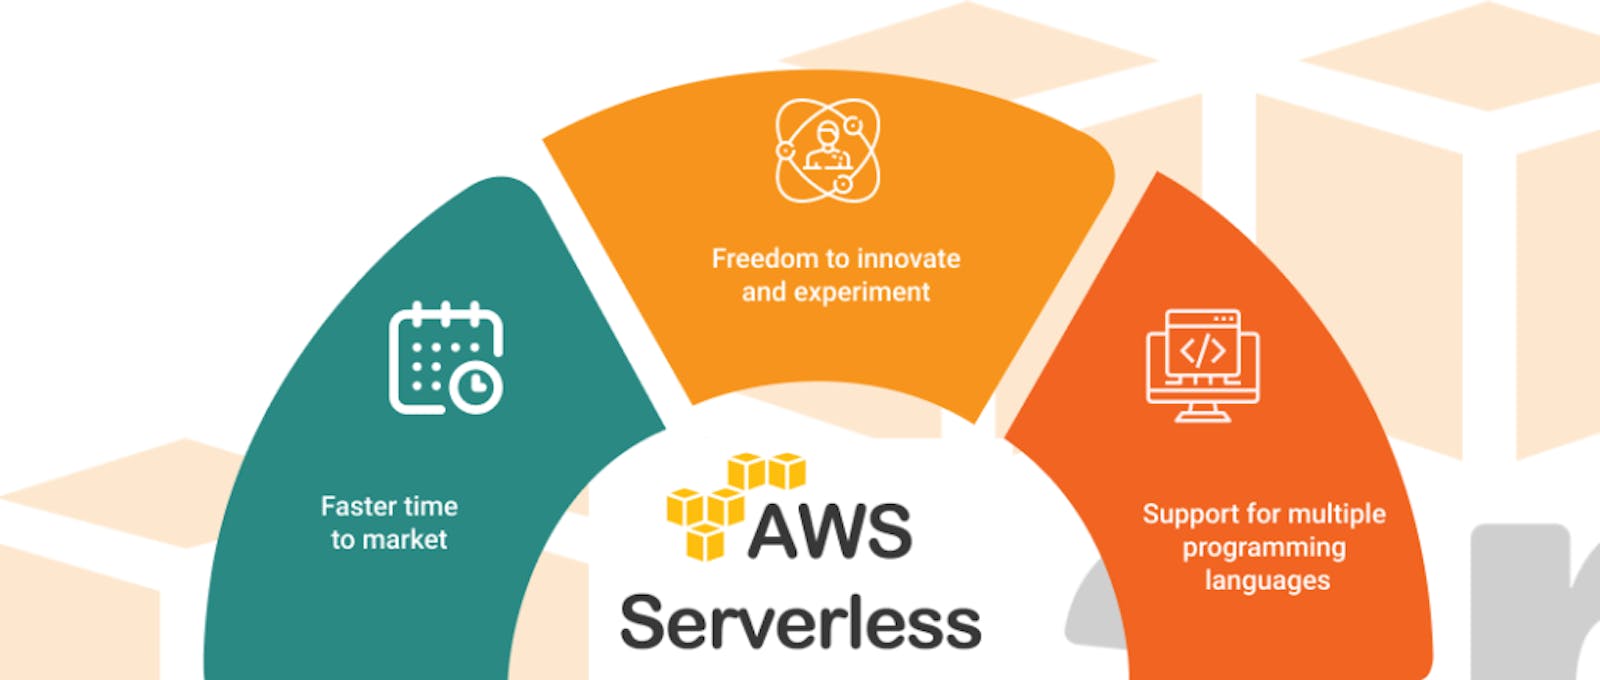 Day 8 of AWS essentials